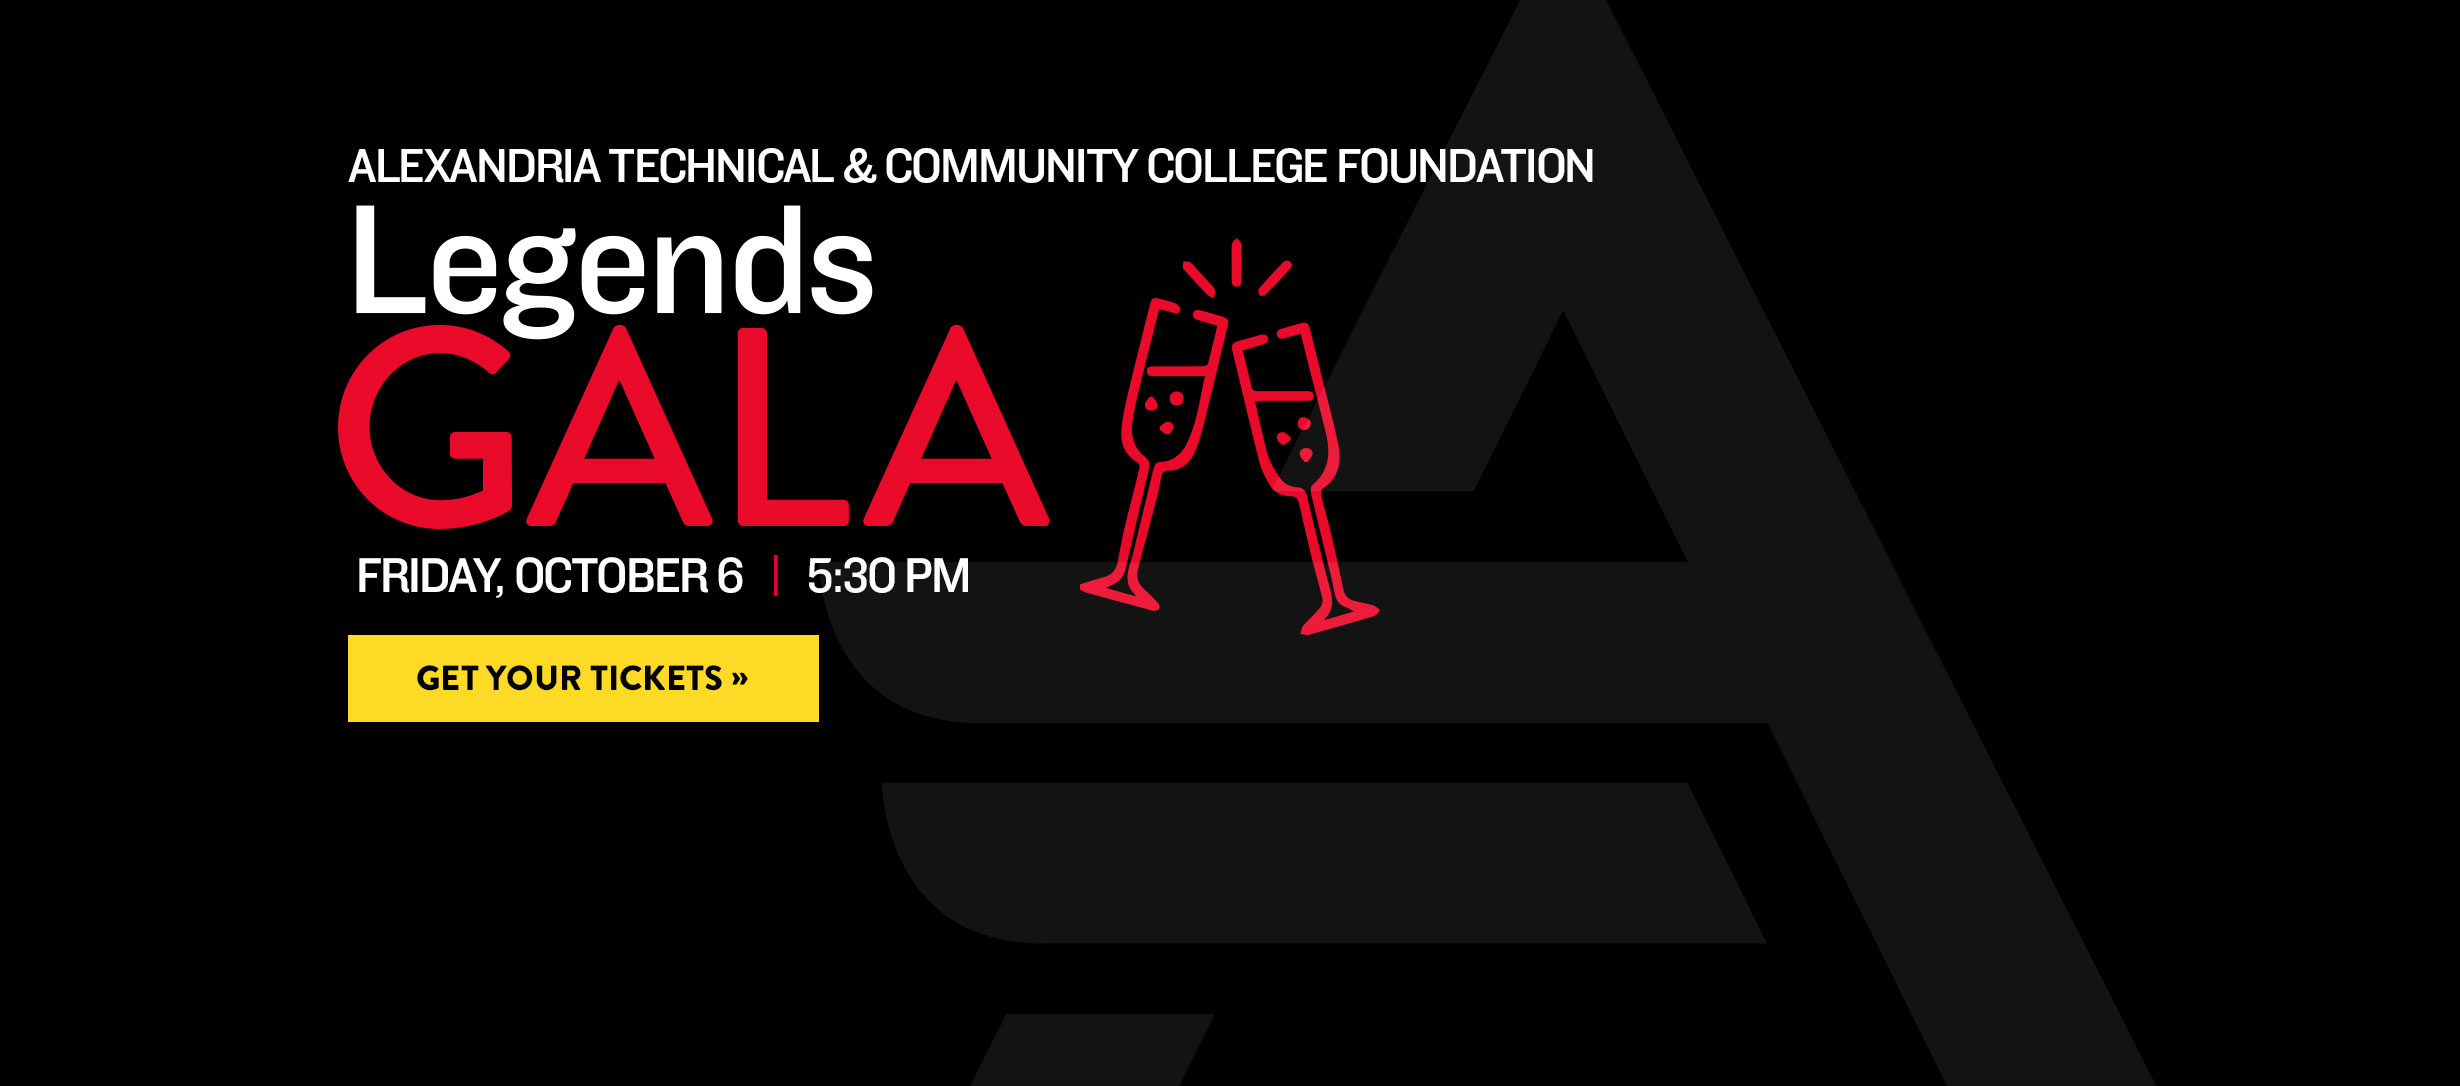 2023 Legends Gala - Friday, October 6, 5:30 pm. Click here to get your tickets!